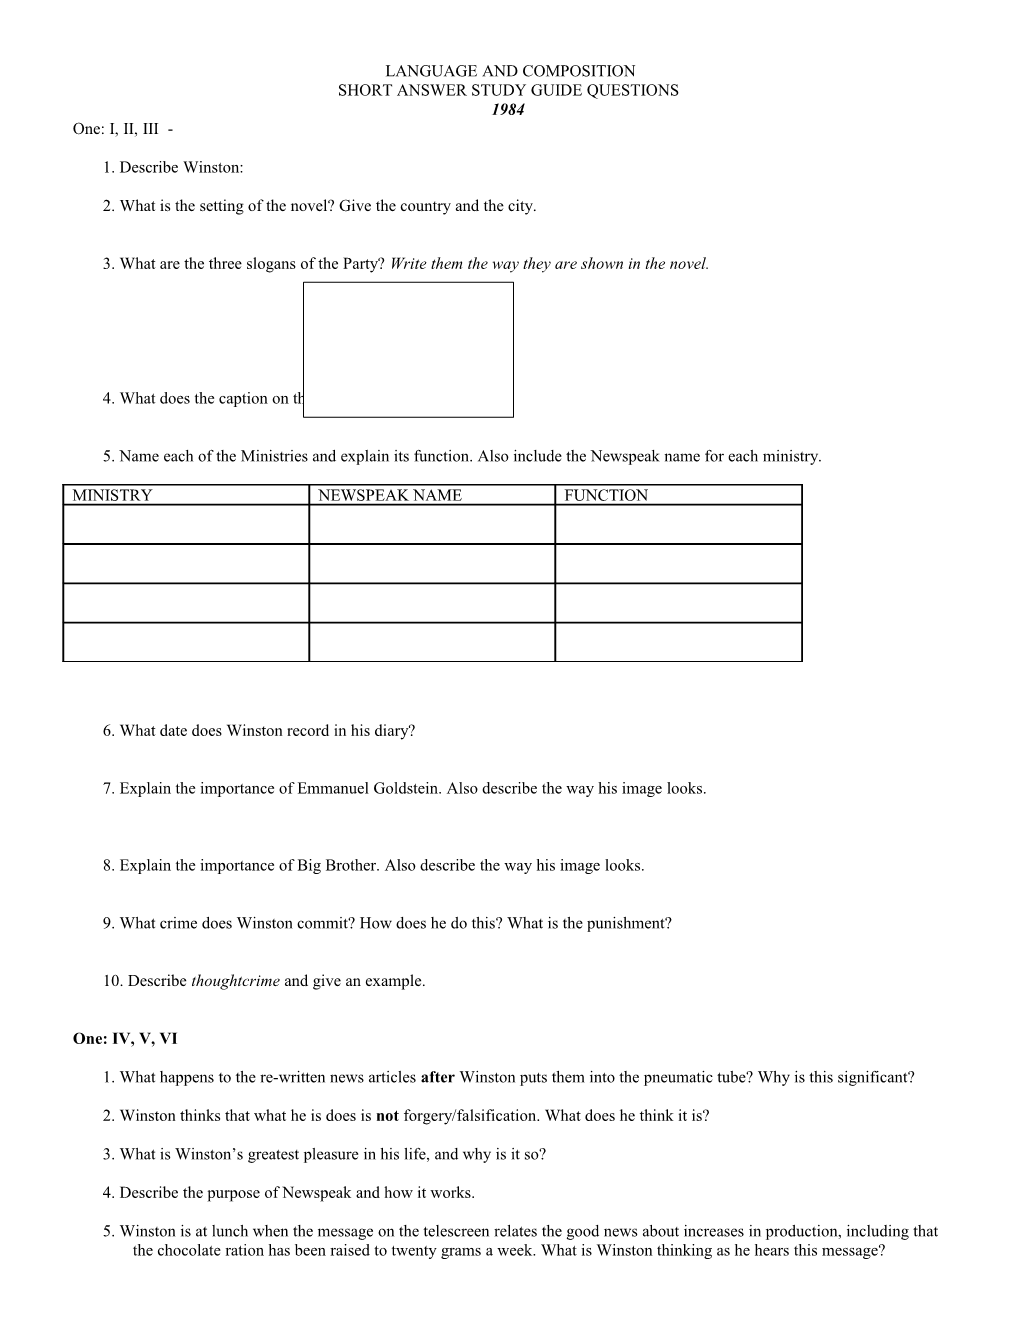 Short Answer Study Guide Questions